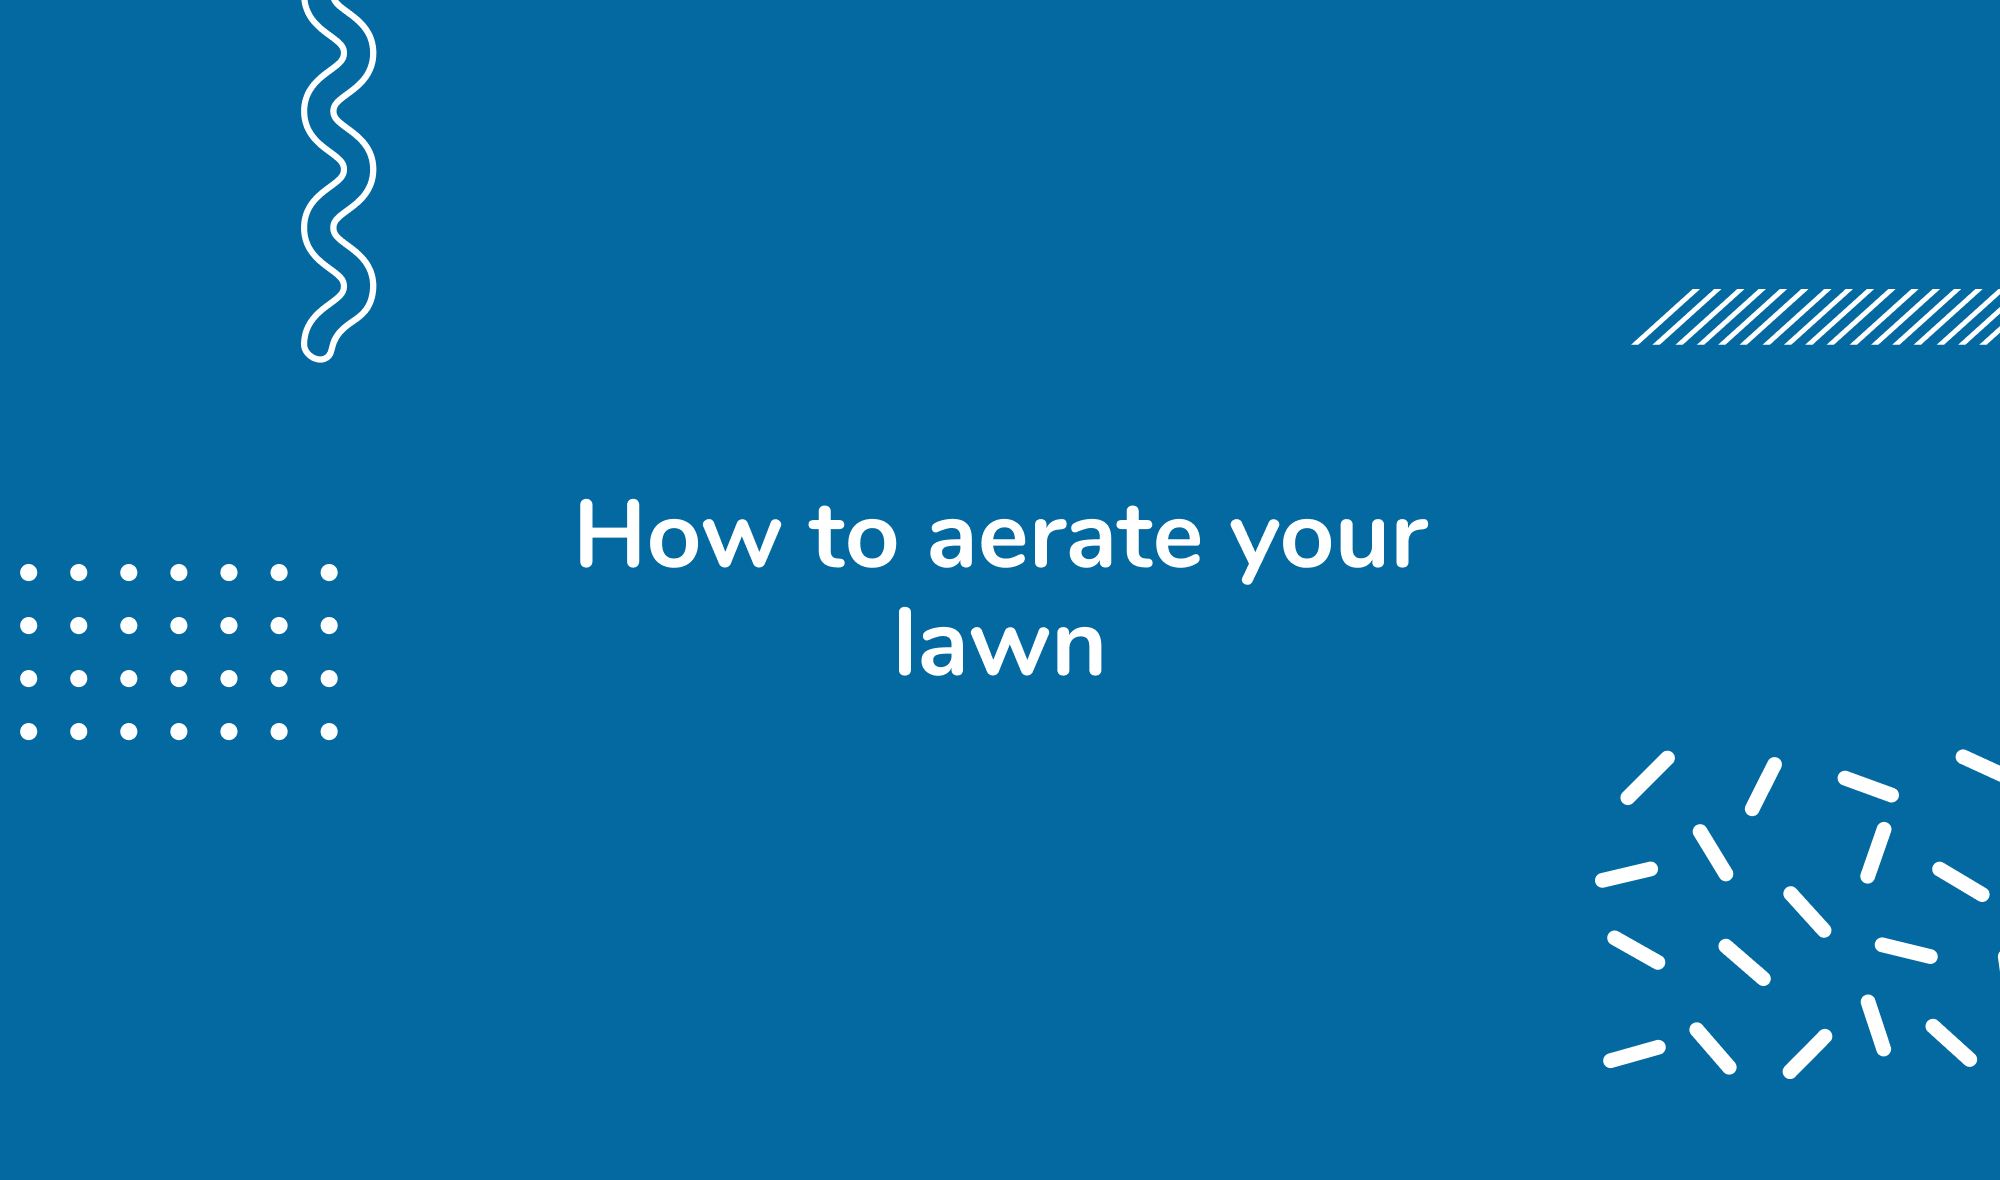 How to aerate your lawn